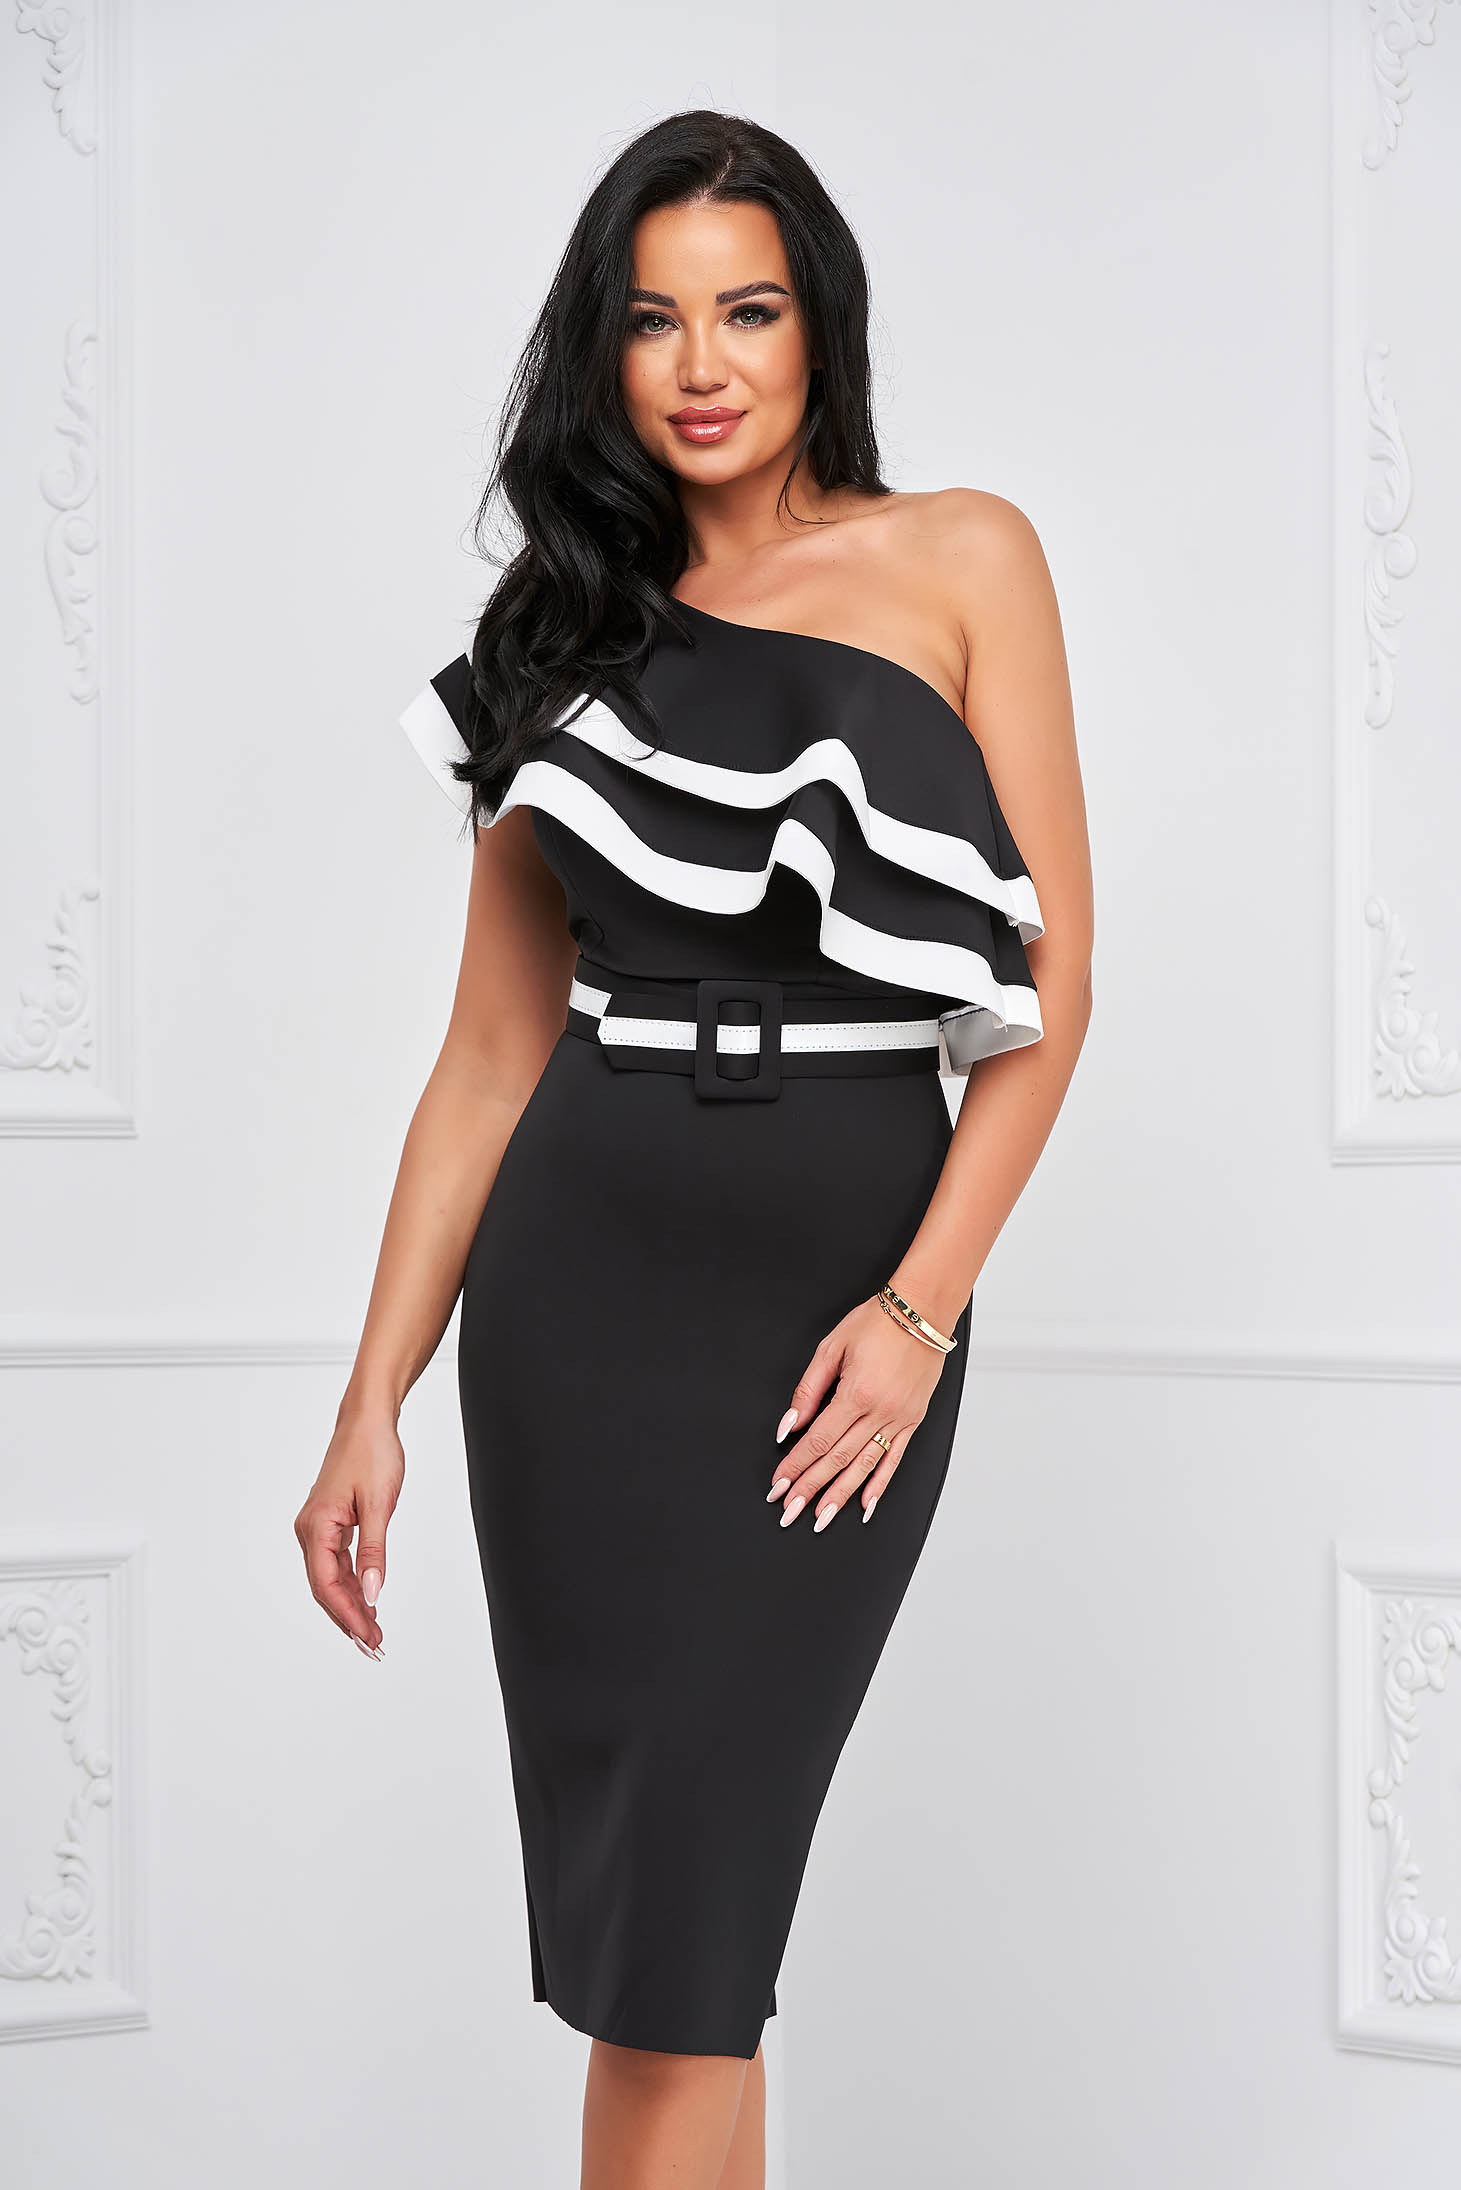 Black dress pencil one shoulder with ruffle details